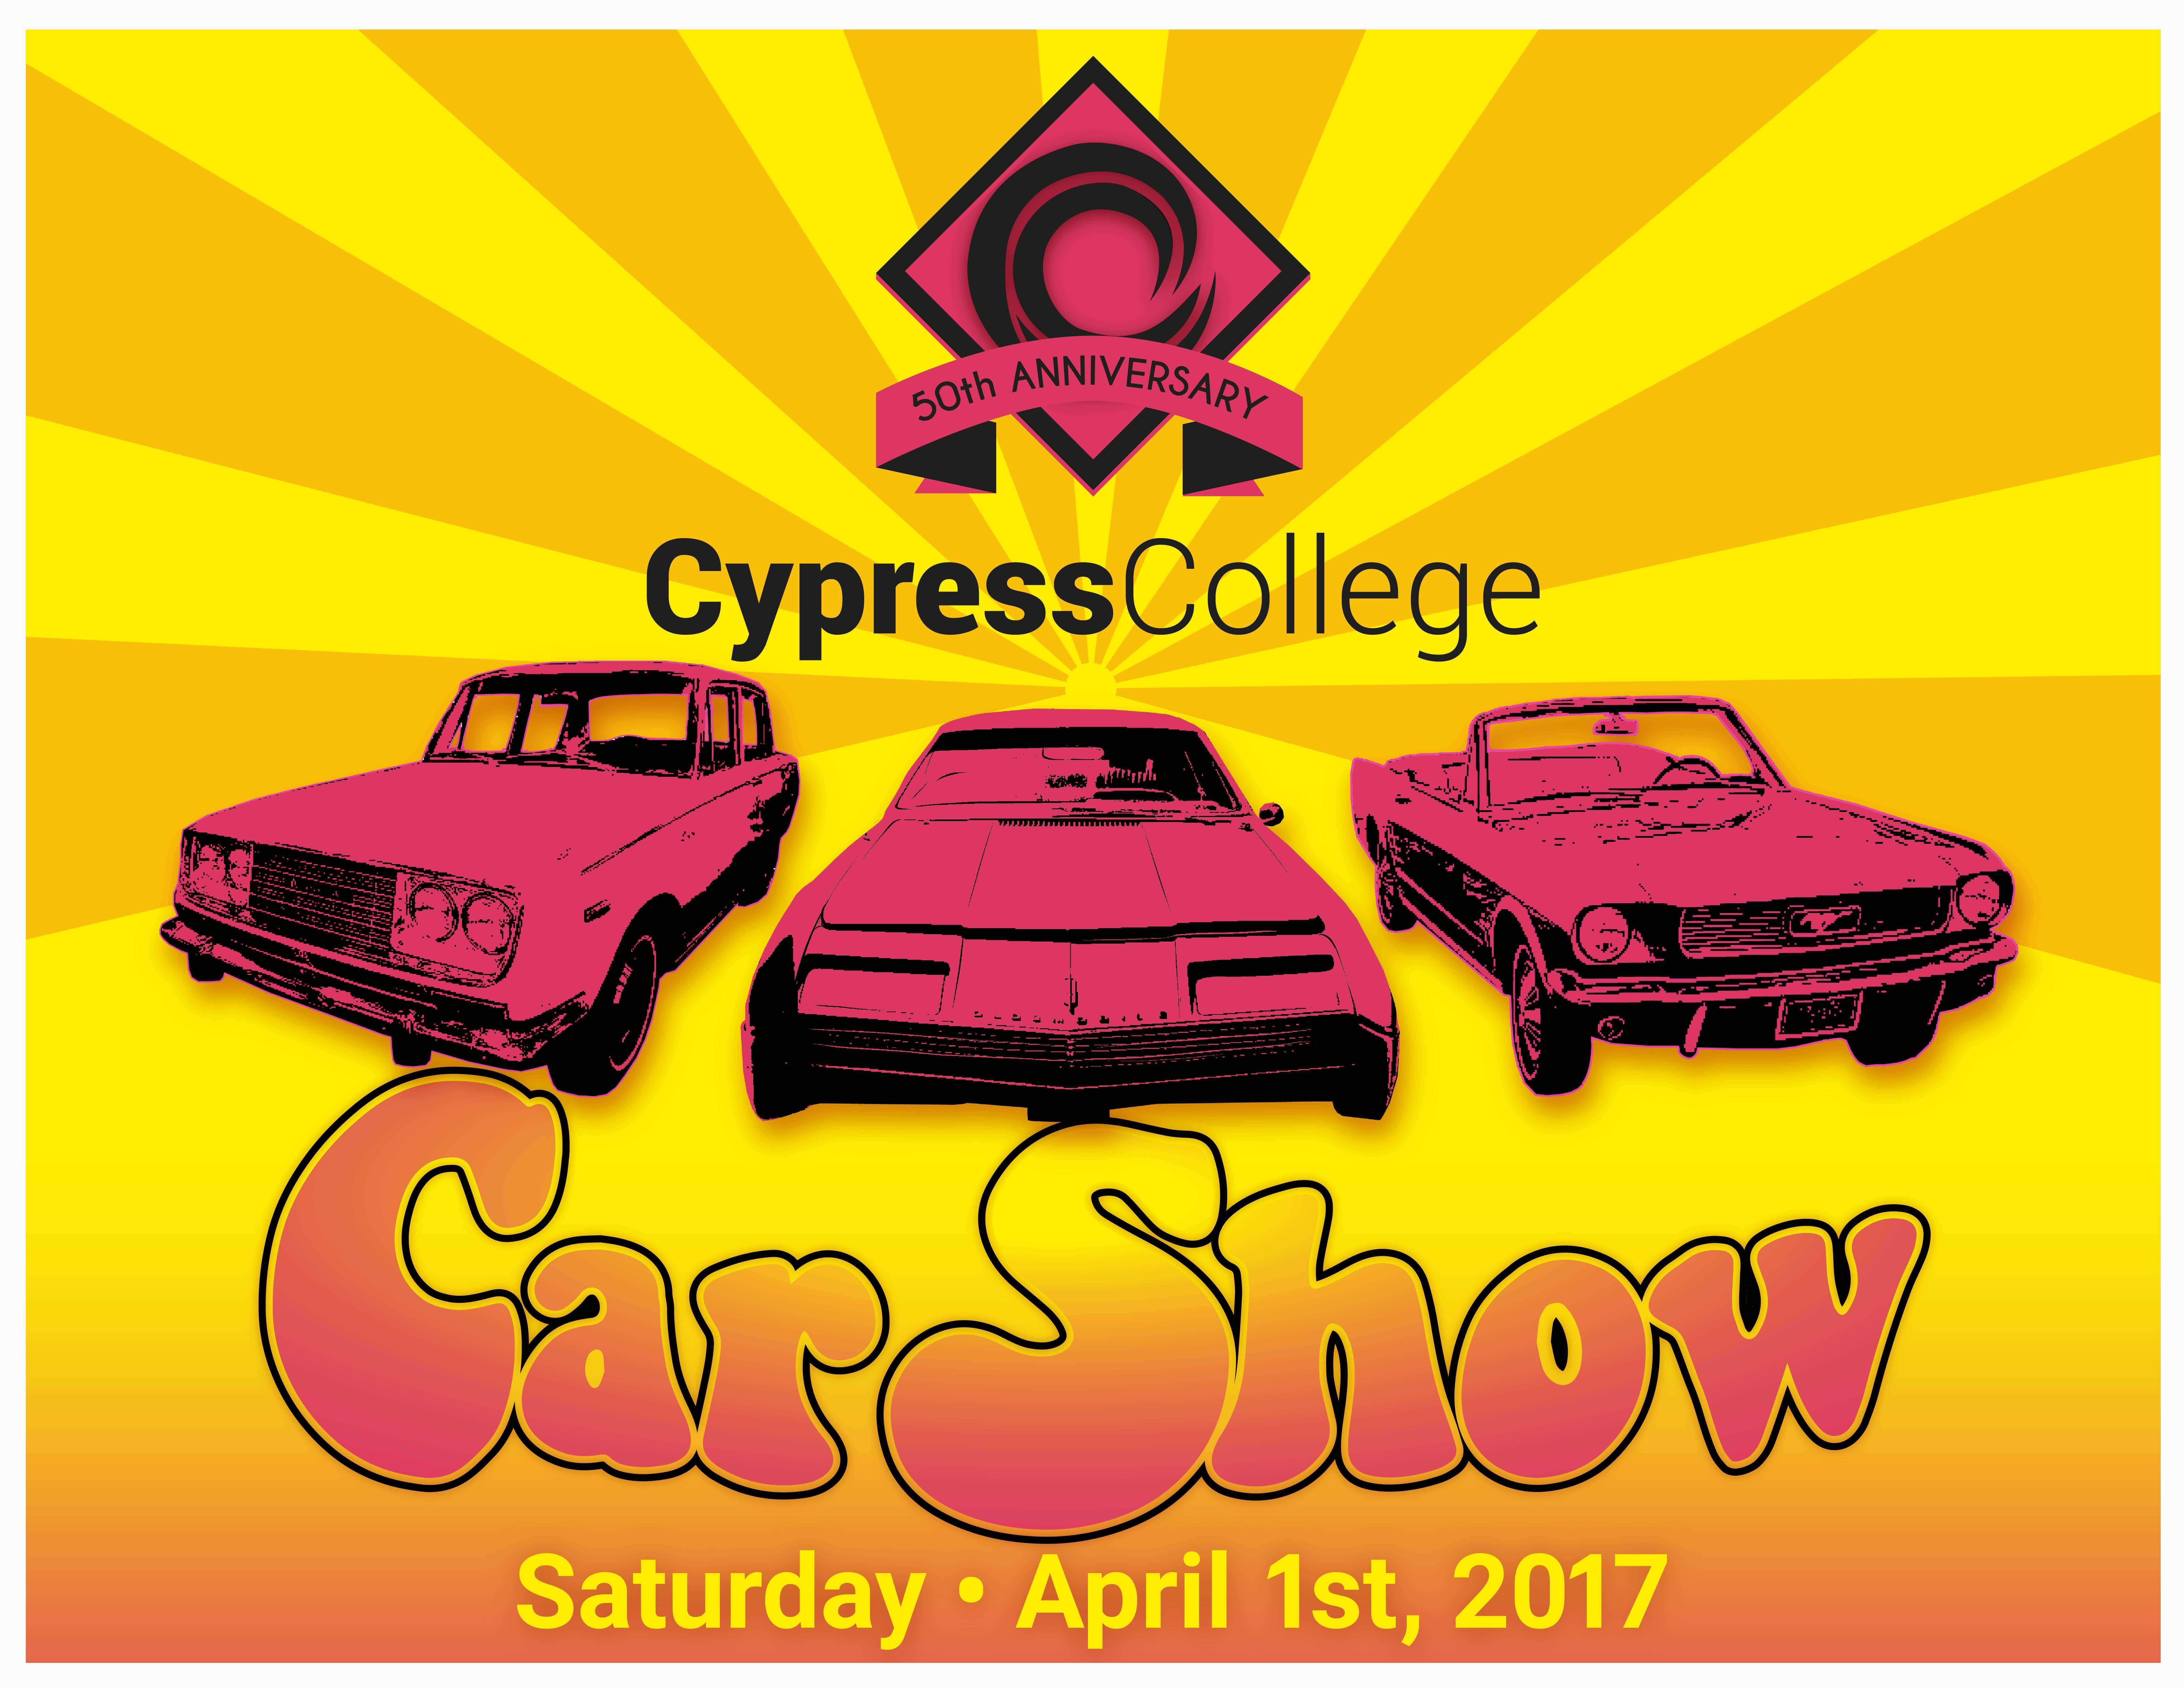 Register for the 50th Anniversary Car Show!